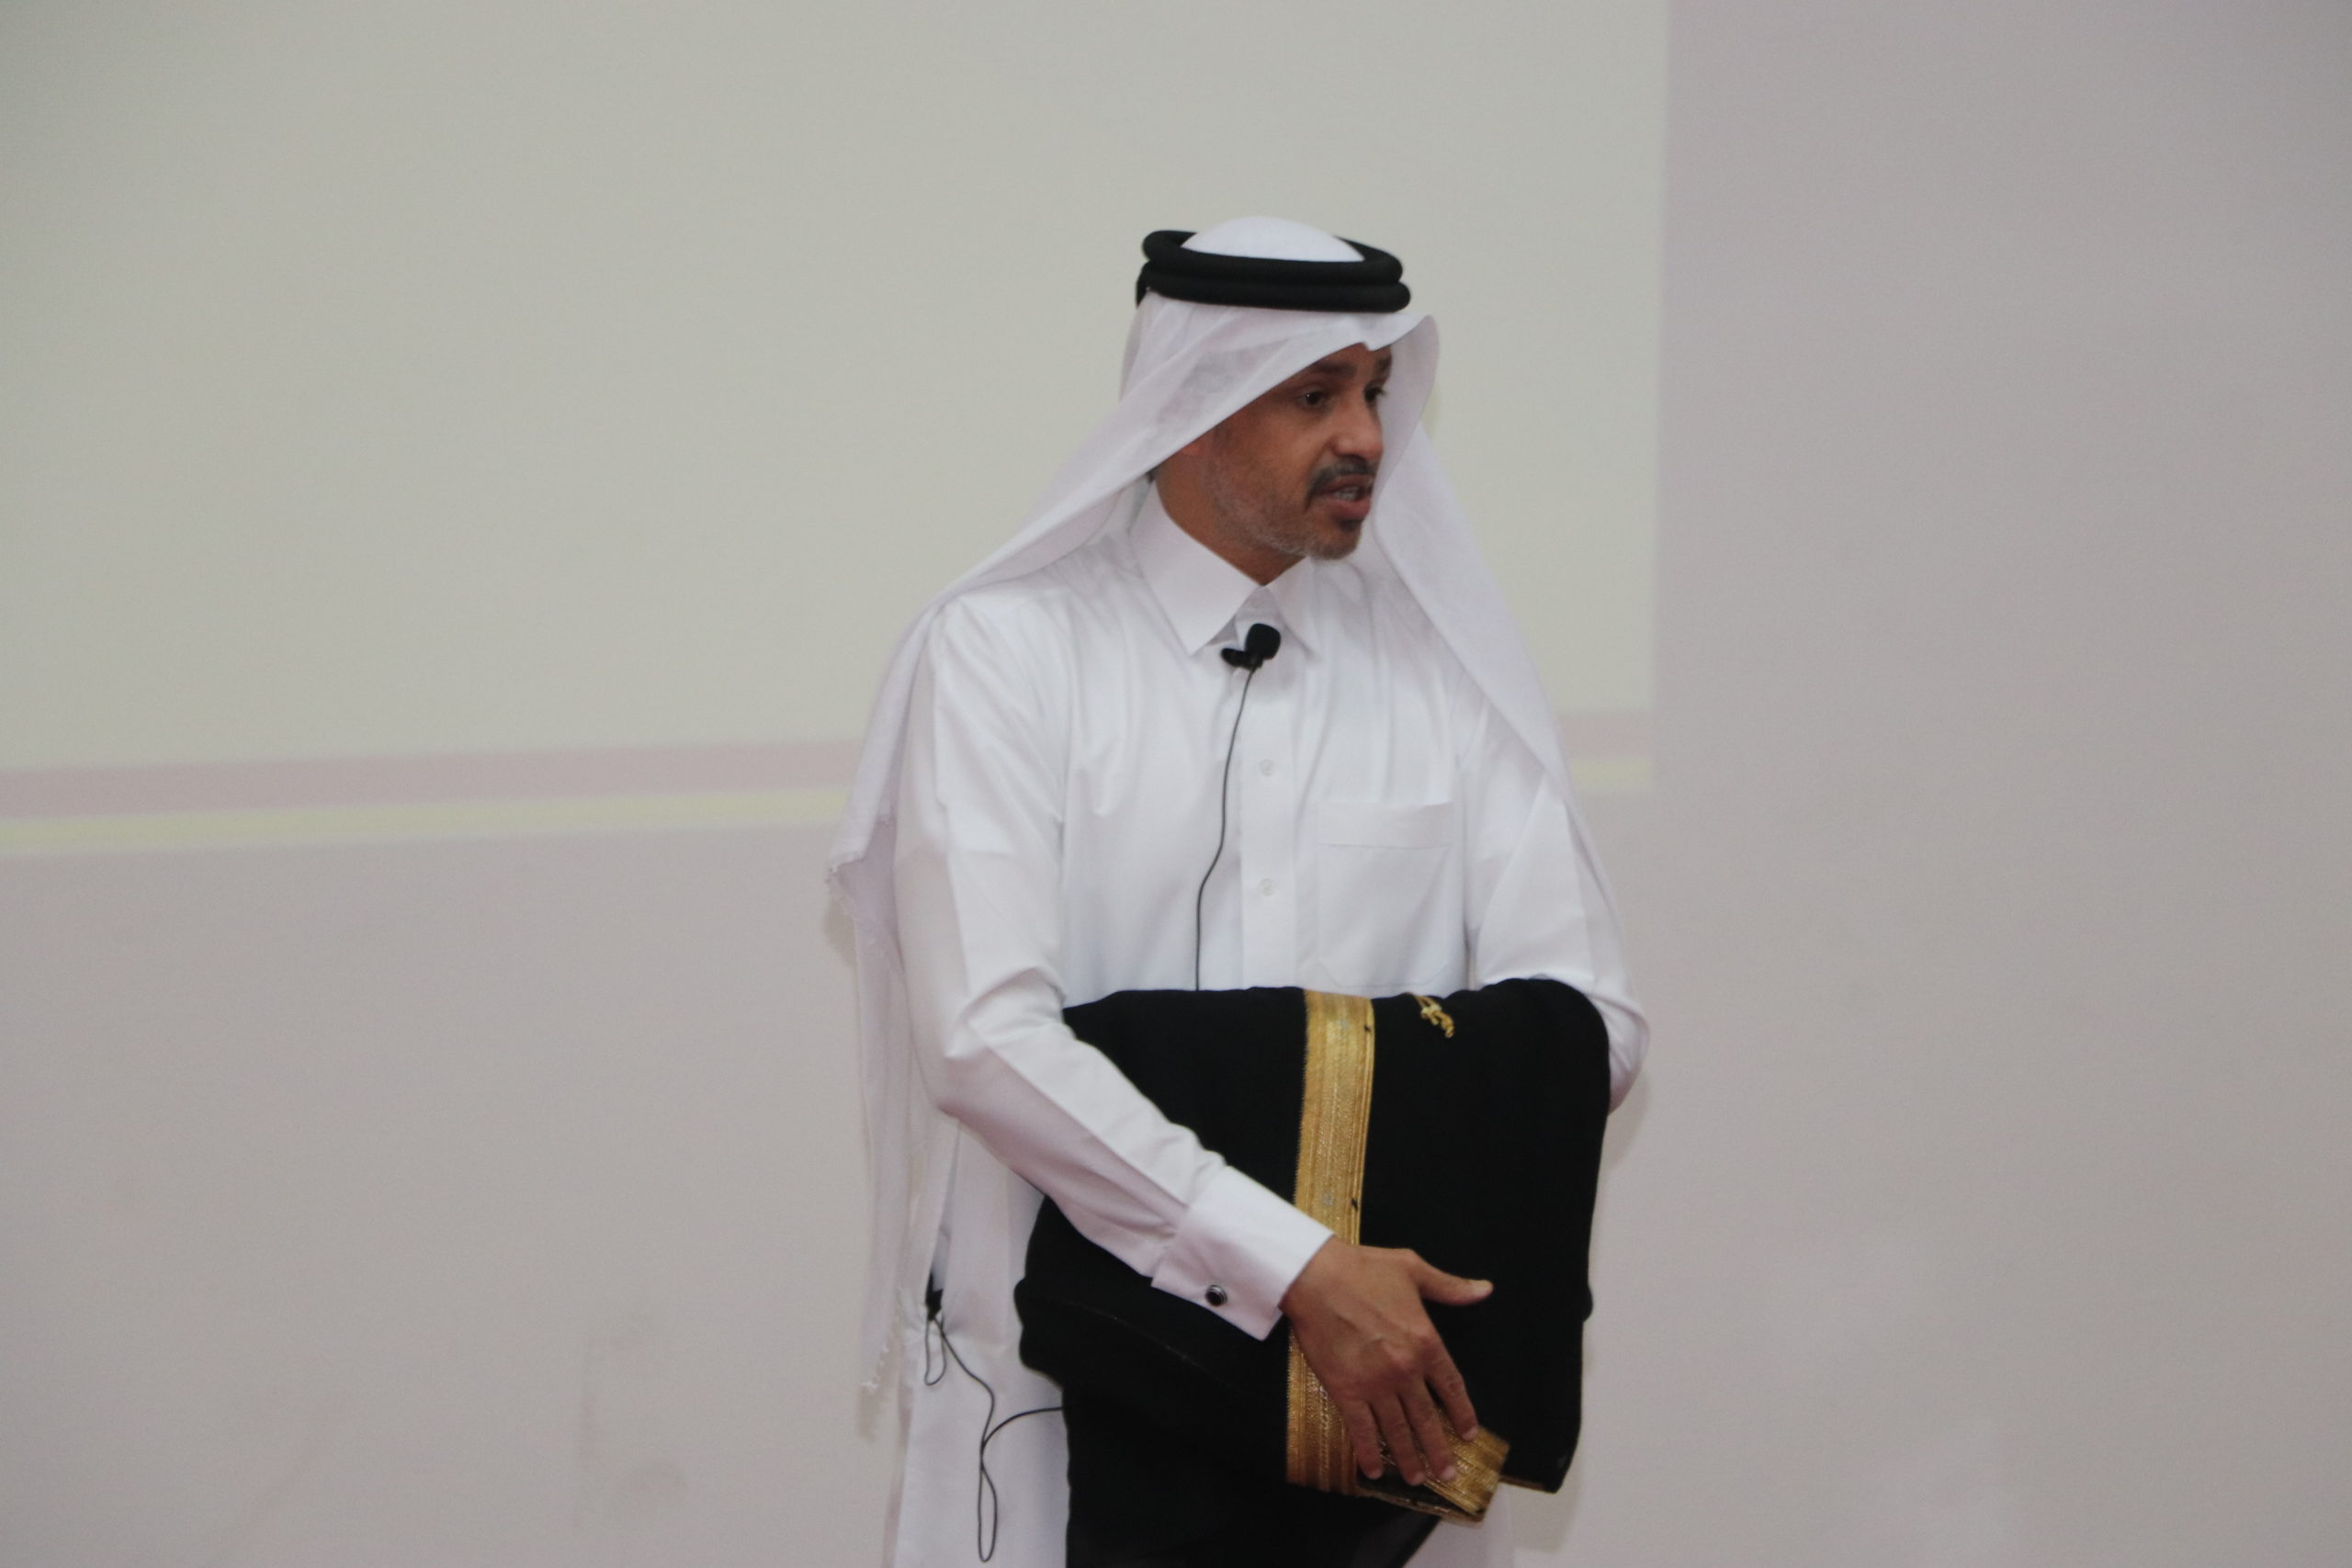 The Etiquette and international protocol for Accompanying Official Delegates course was concluded from 1 to 5 March 2020